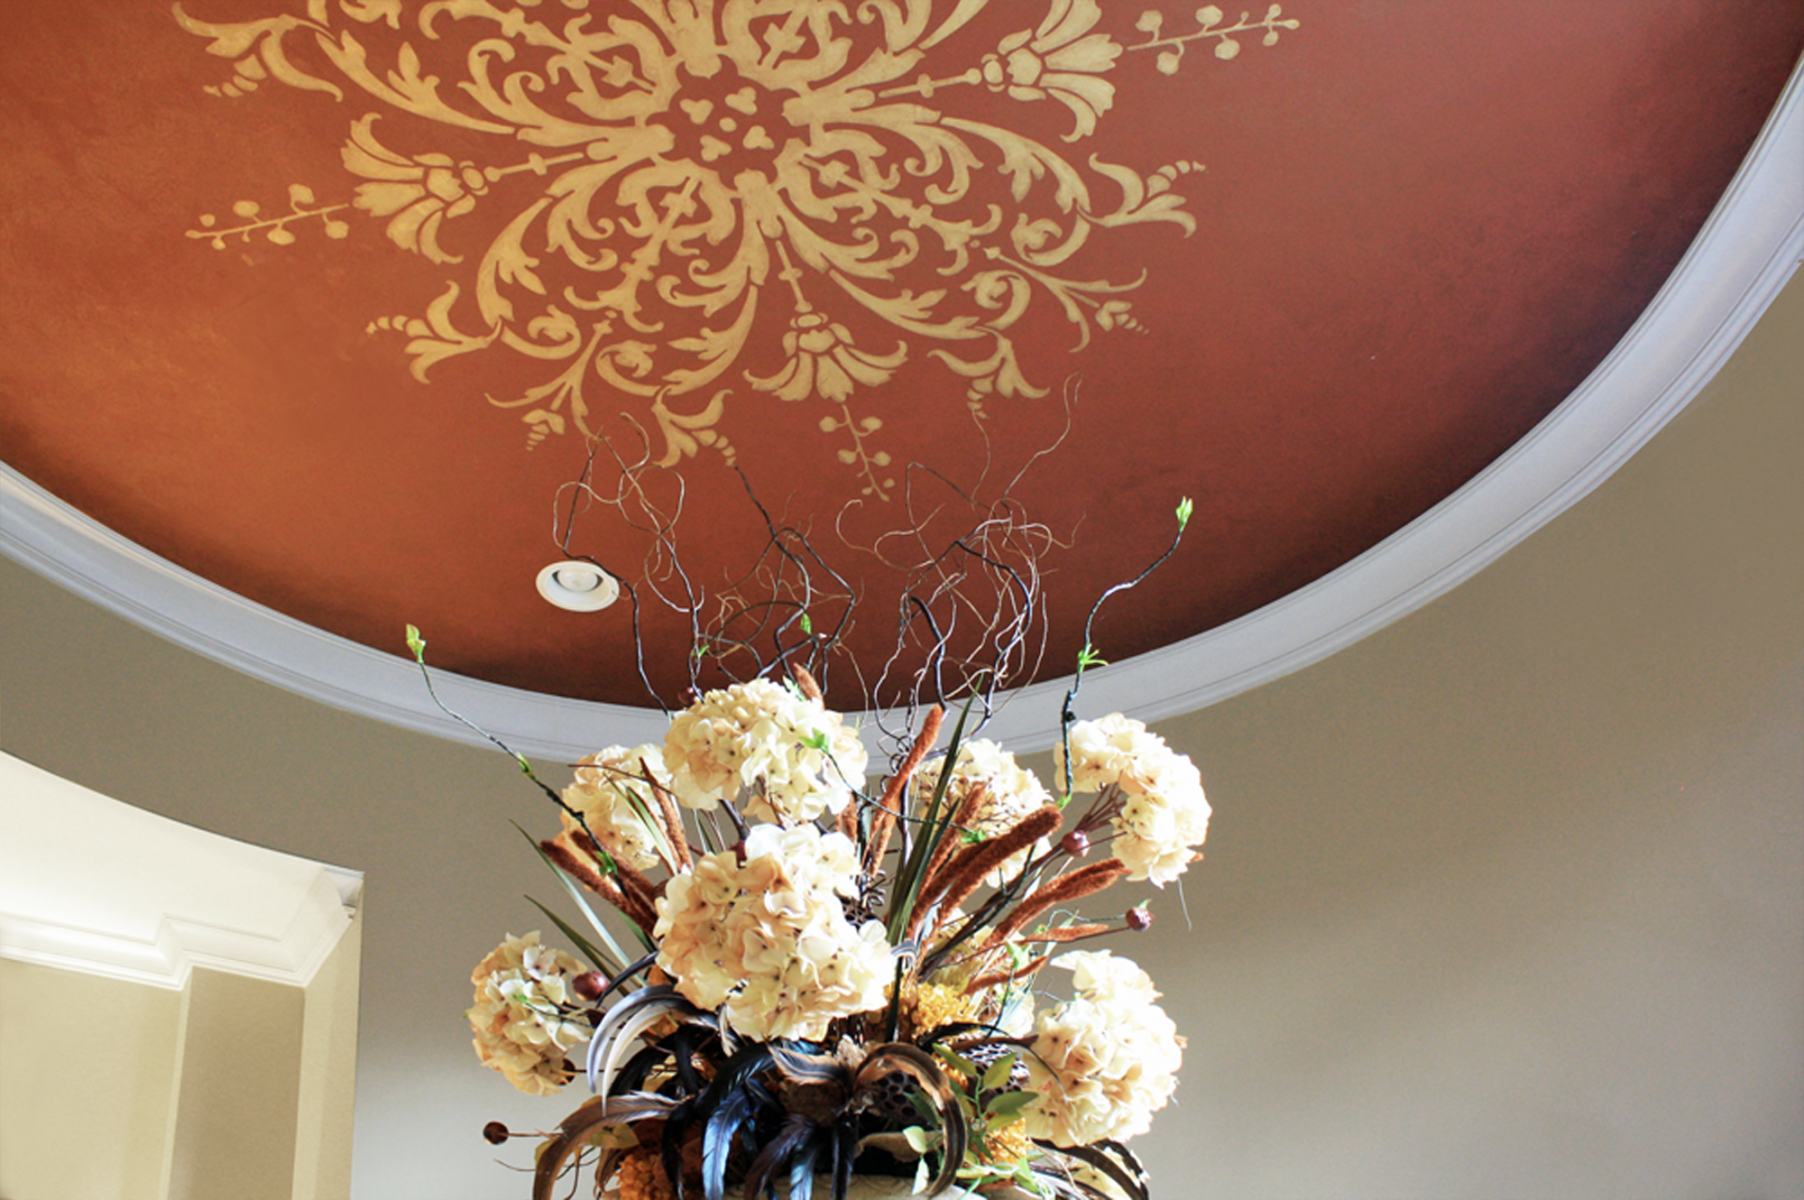 After of this custom ceiling stencil in gold Lusterstone with glazed edging to create a dome effect.